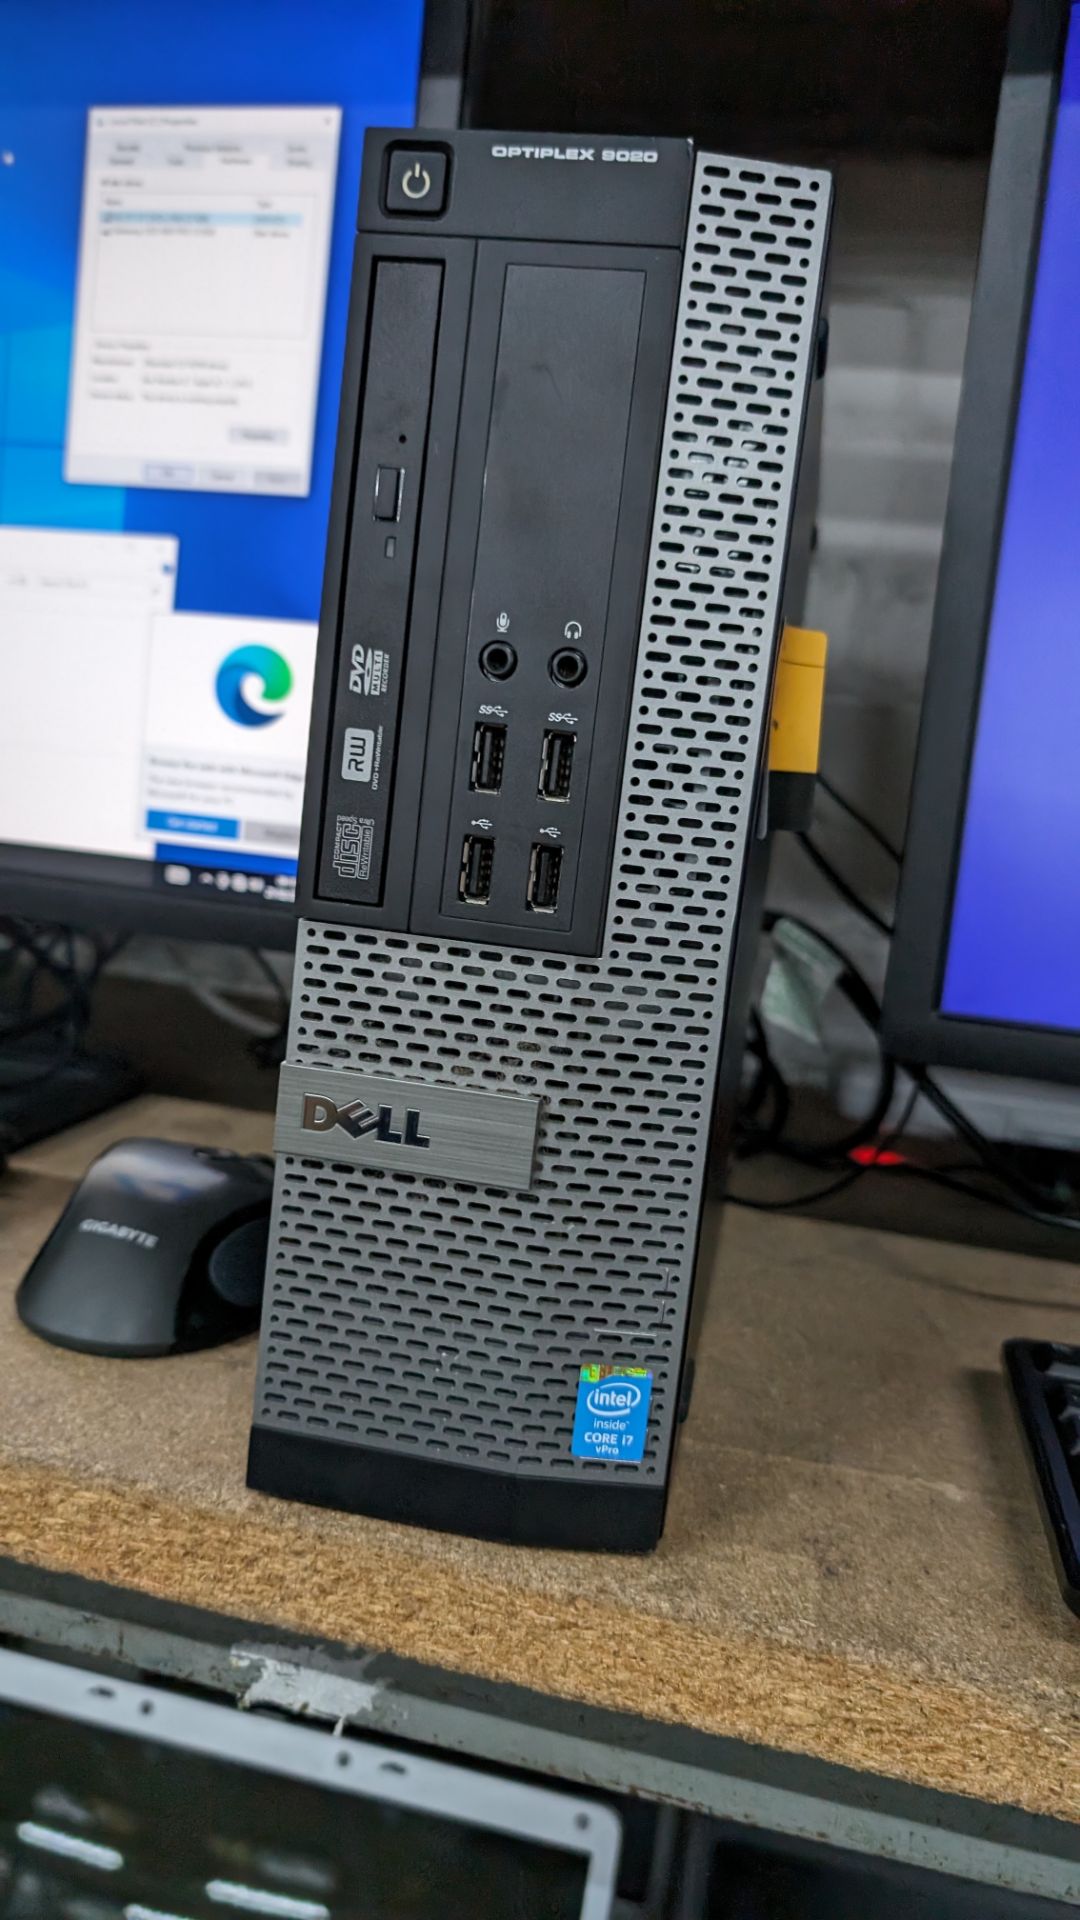 Dell Optiplex 9020 compact tower computer with Intel i7 vPro processor, including widescreen monitor - Image 8 of 18